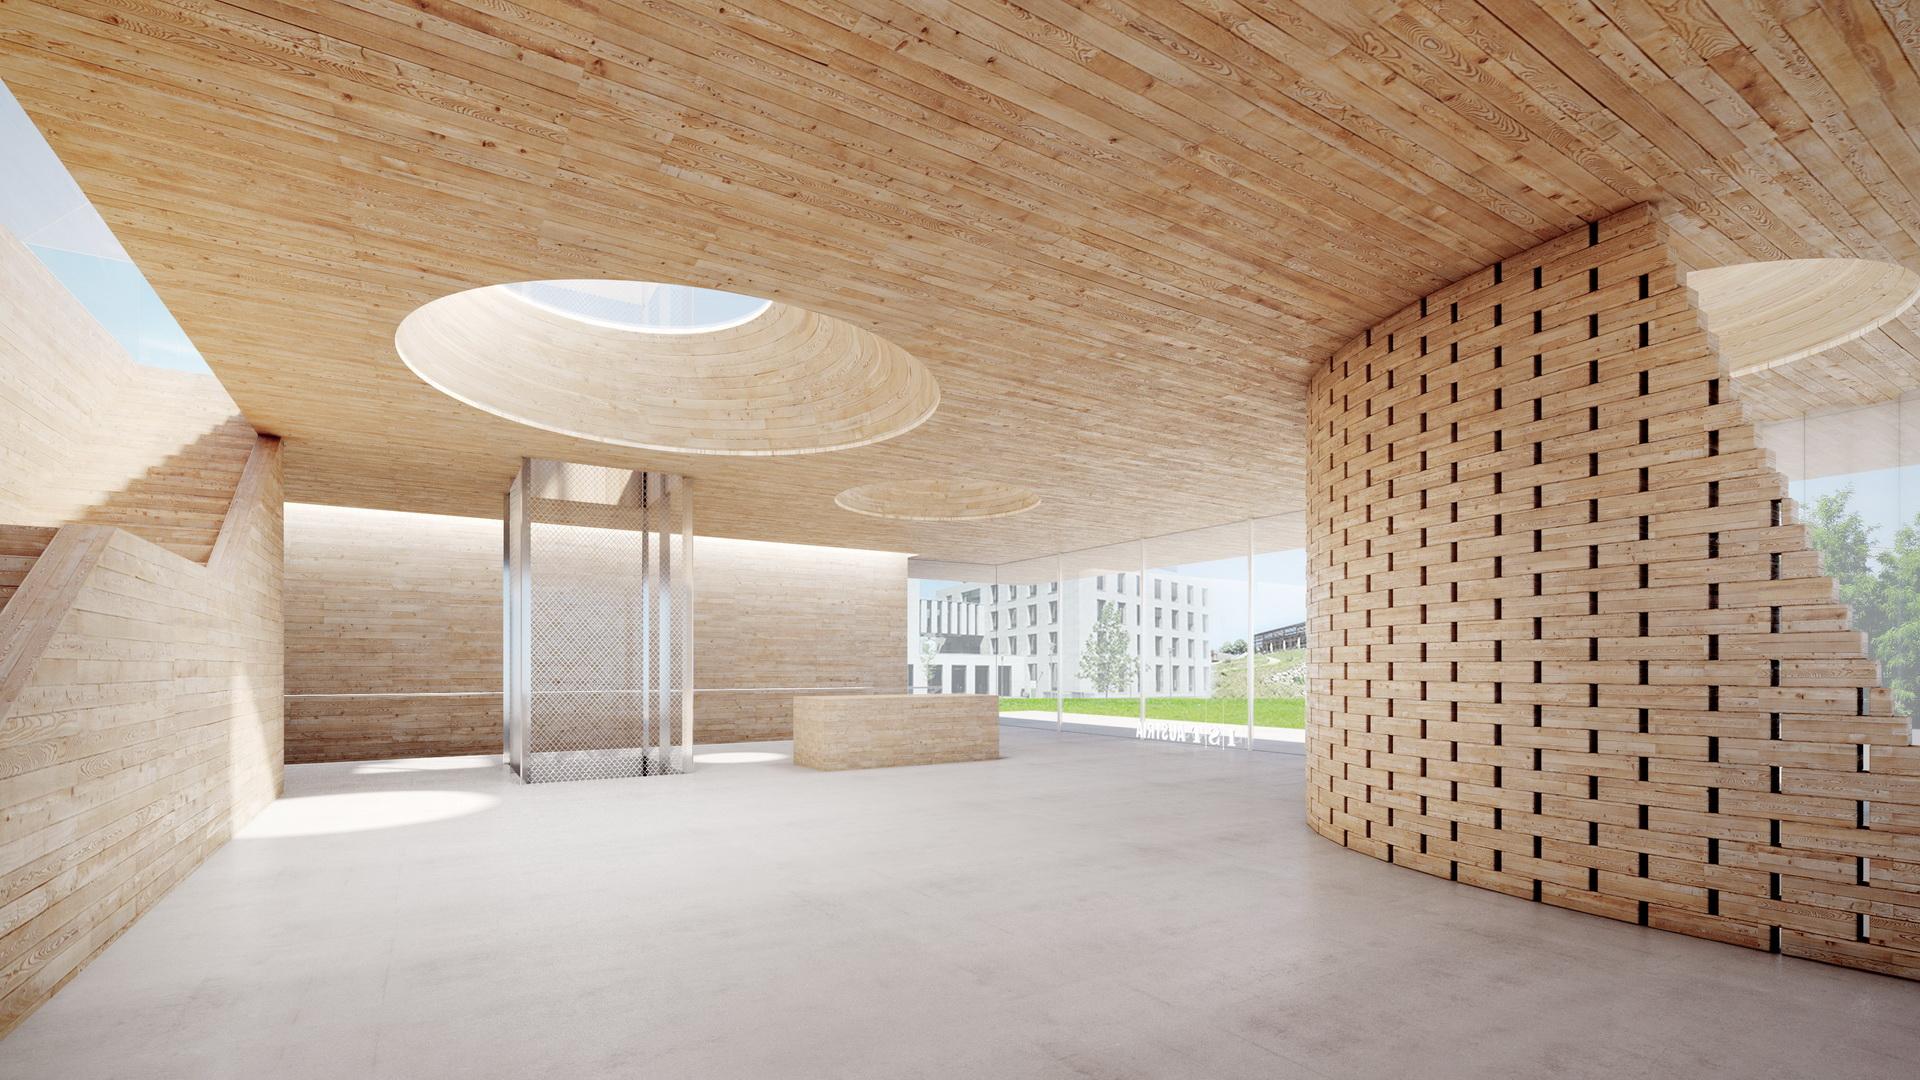 OHA - 813 IST AUSTRIA VISITOR CENTER 02 - Office For Heuristic Architecture